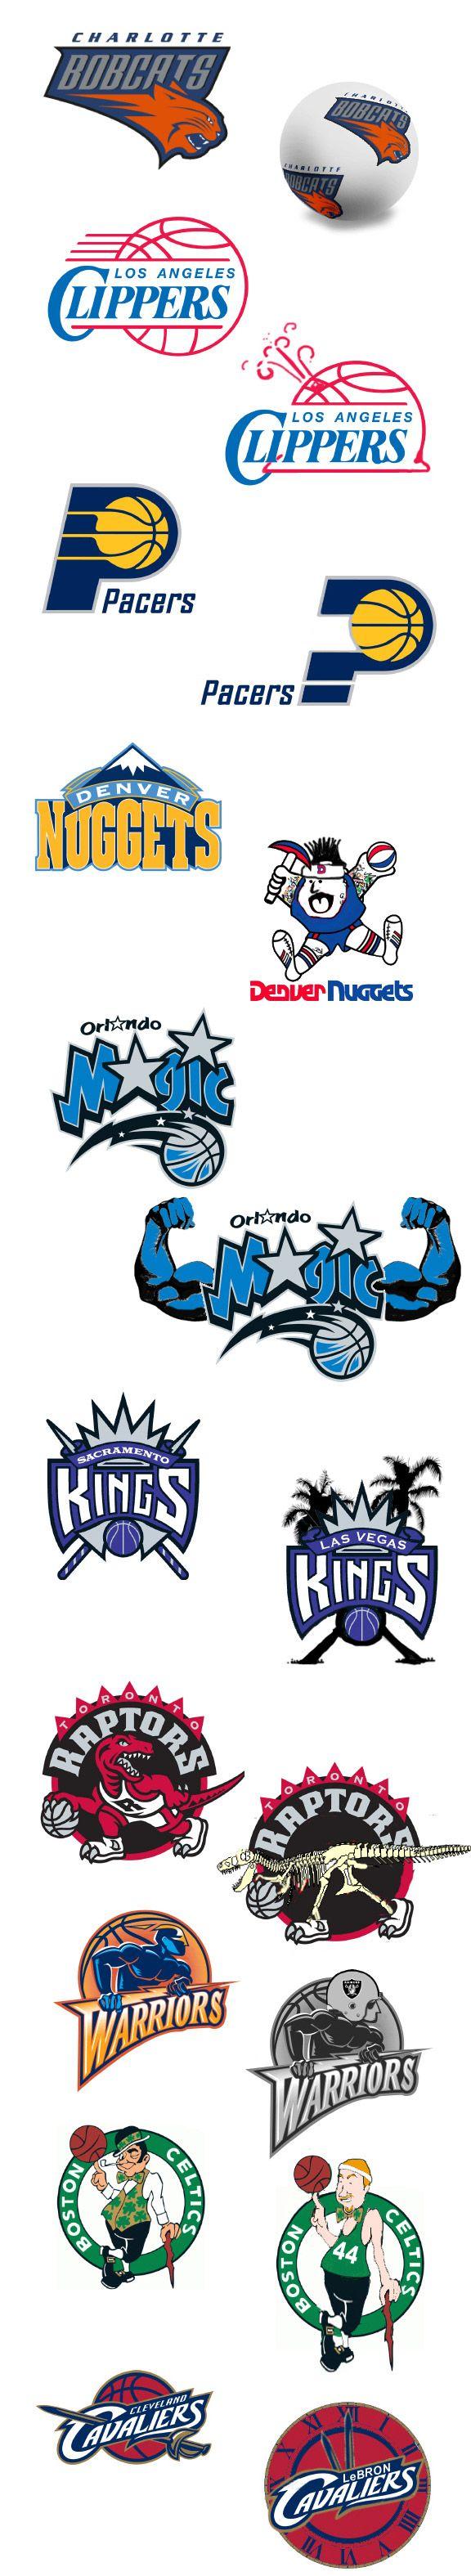 New NBA Logo - unveils new and improved NBA team logos to celebrate the tip